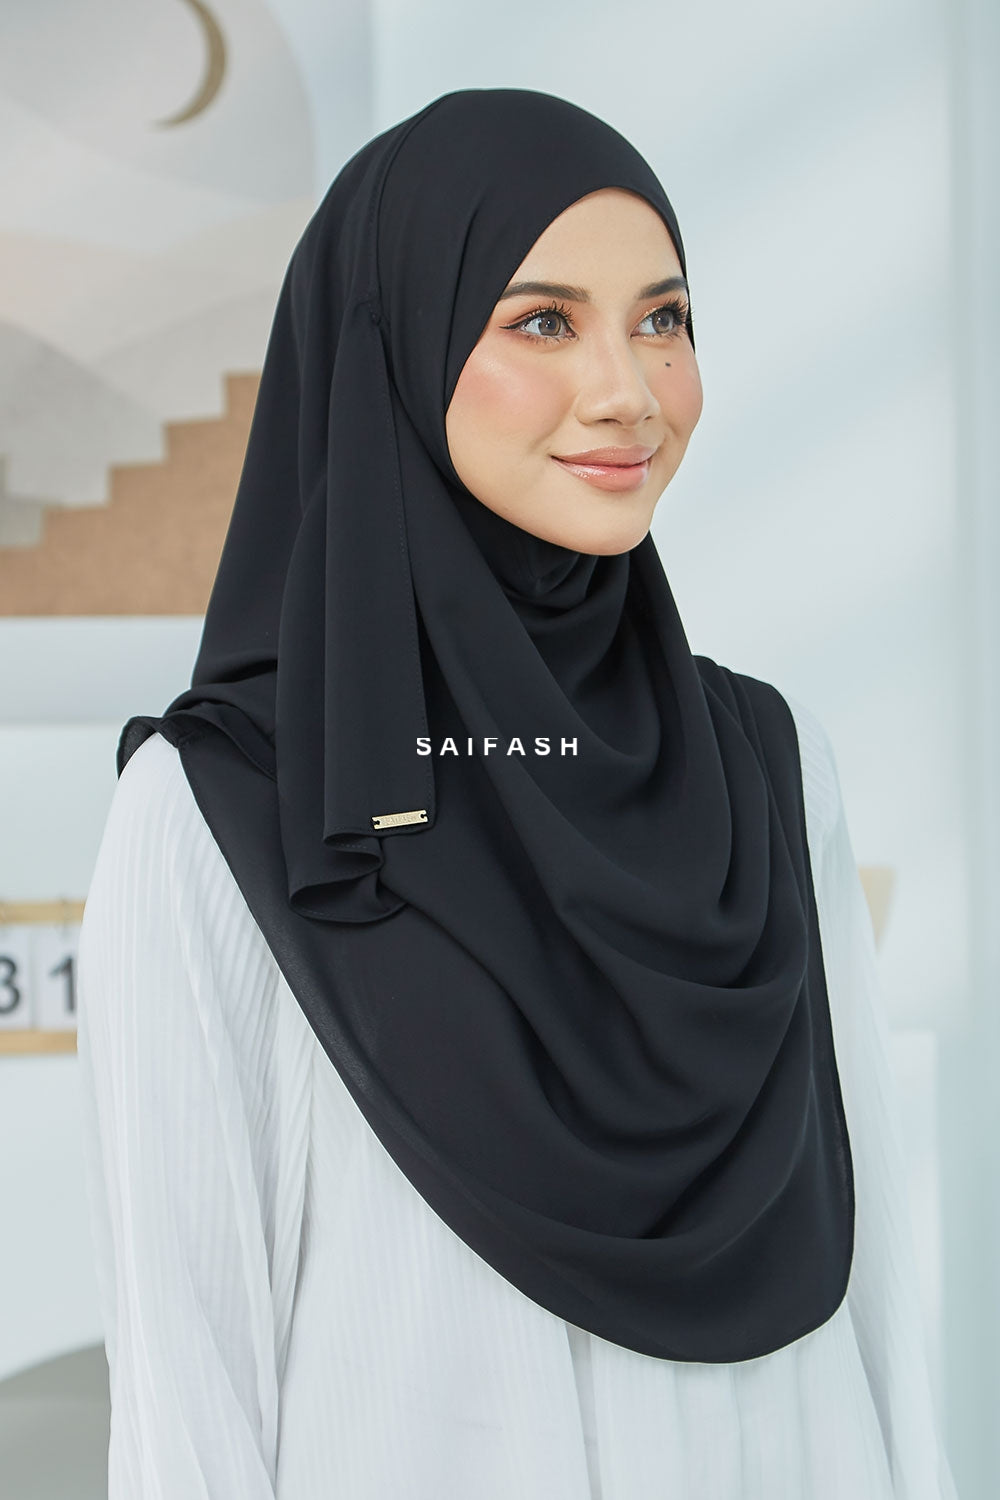 Aralyn Babes Instant Hijab in Black